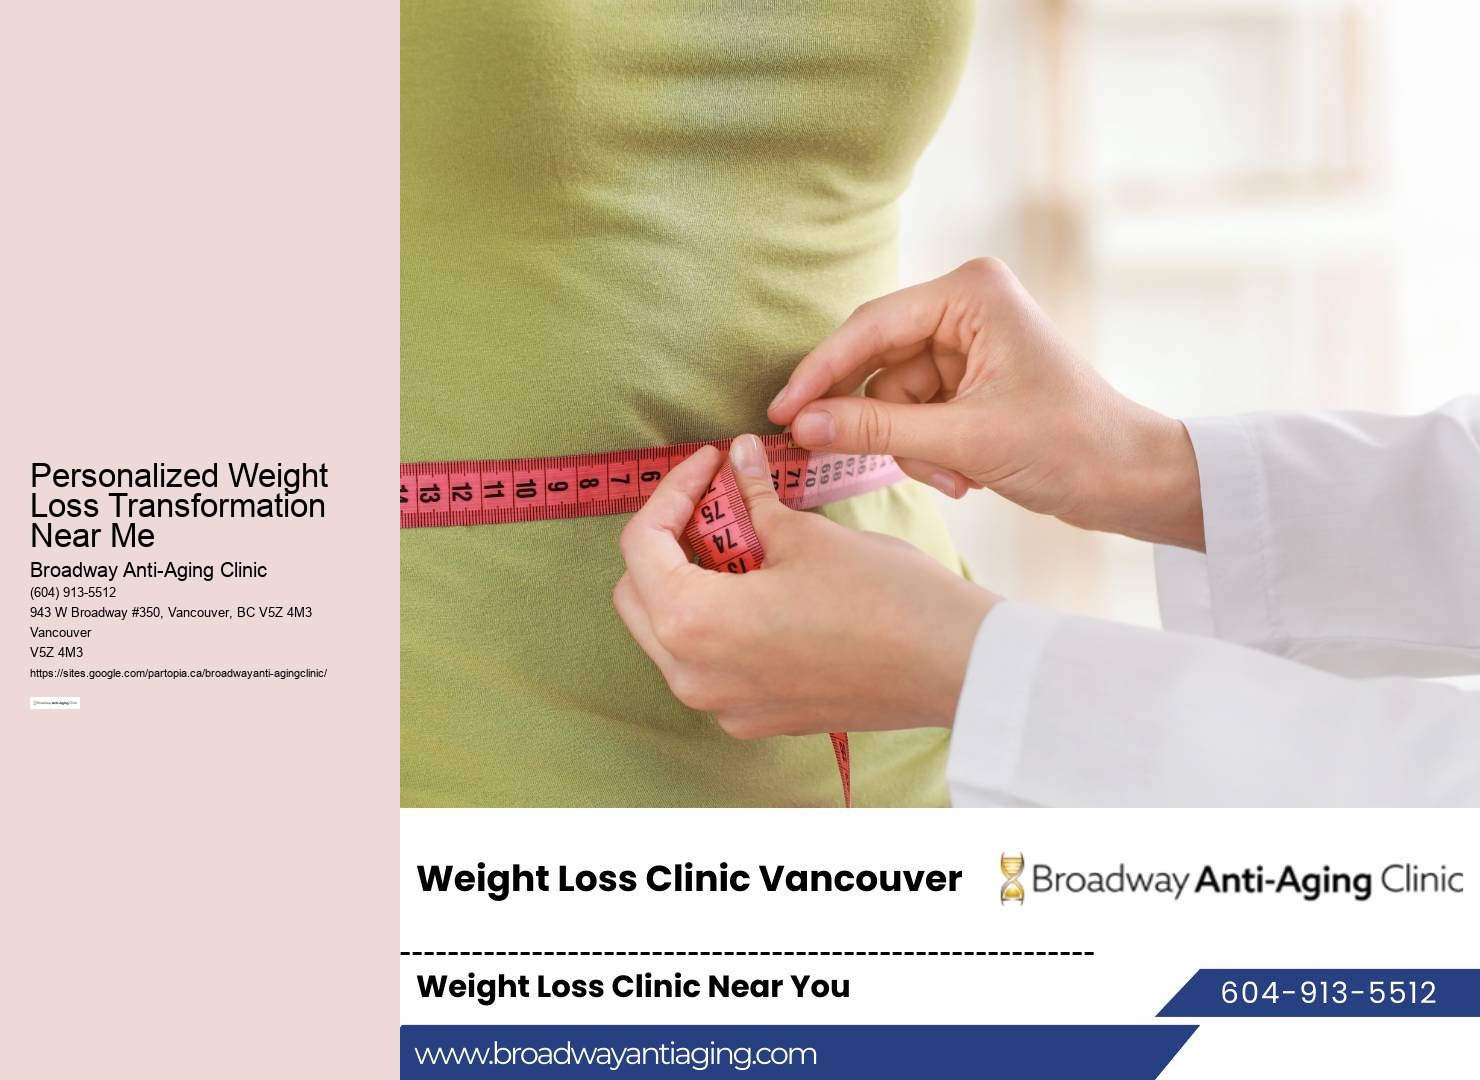 Medical weight loss treatments Vancouver promotions